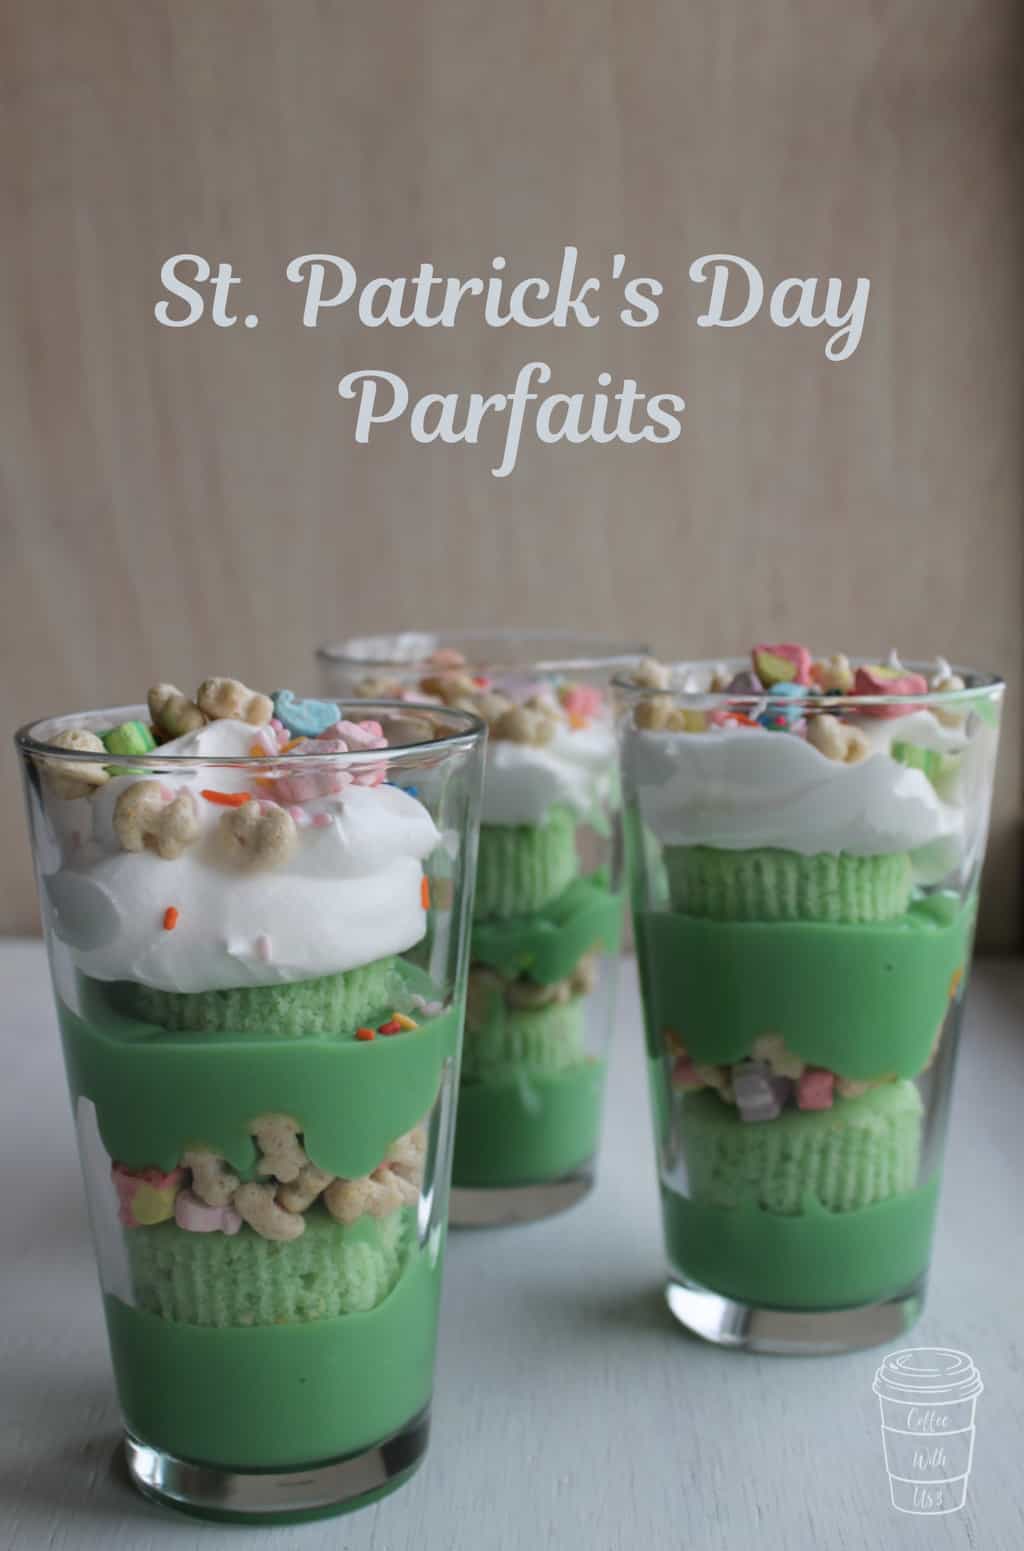 Three St. Patrick's Day parfaits on a white table